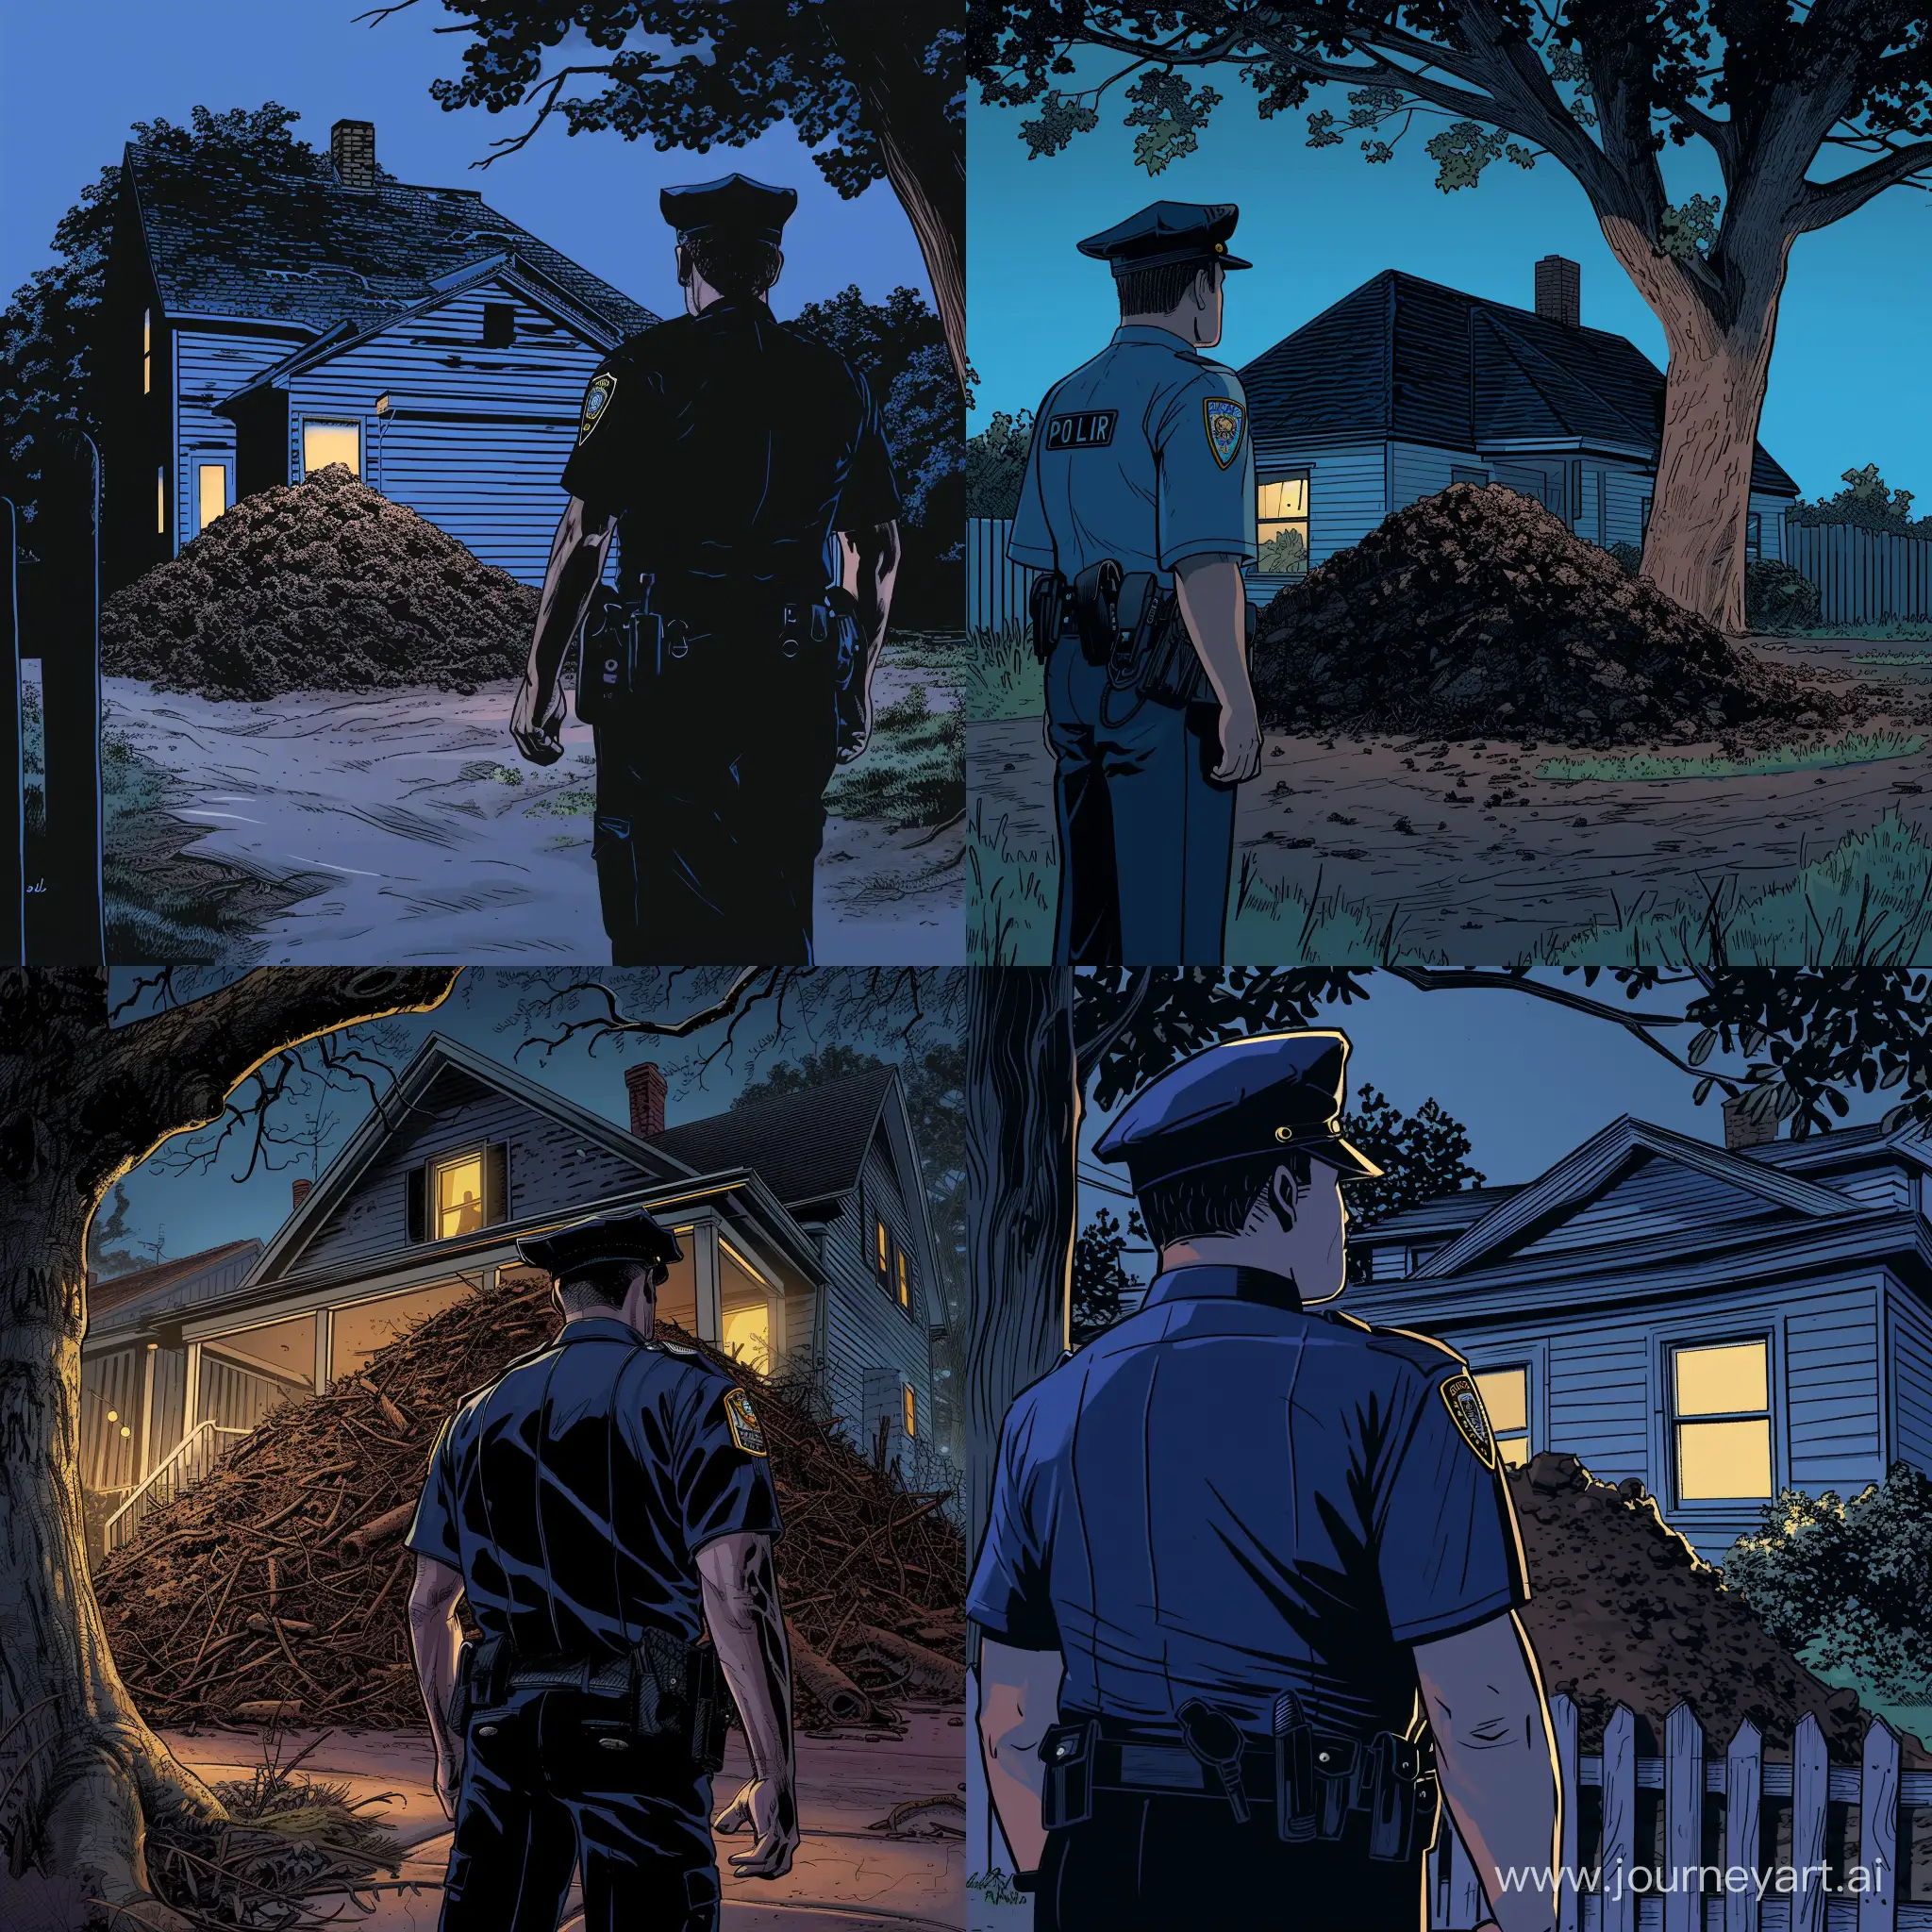 Curious-Policeman-Investigates-Mysterious-Dirt-Pile-in-Dimly-Lit-Scene-Modern-American-Comic-Book-Style